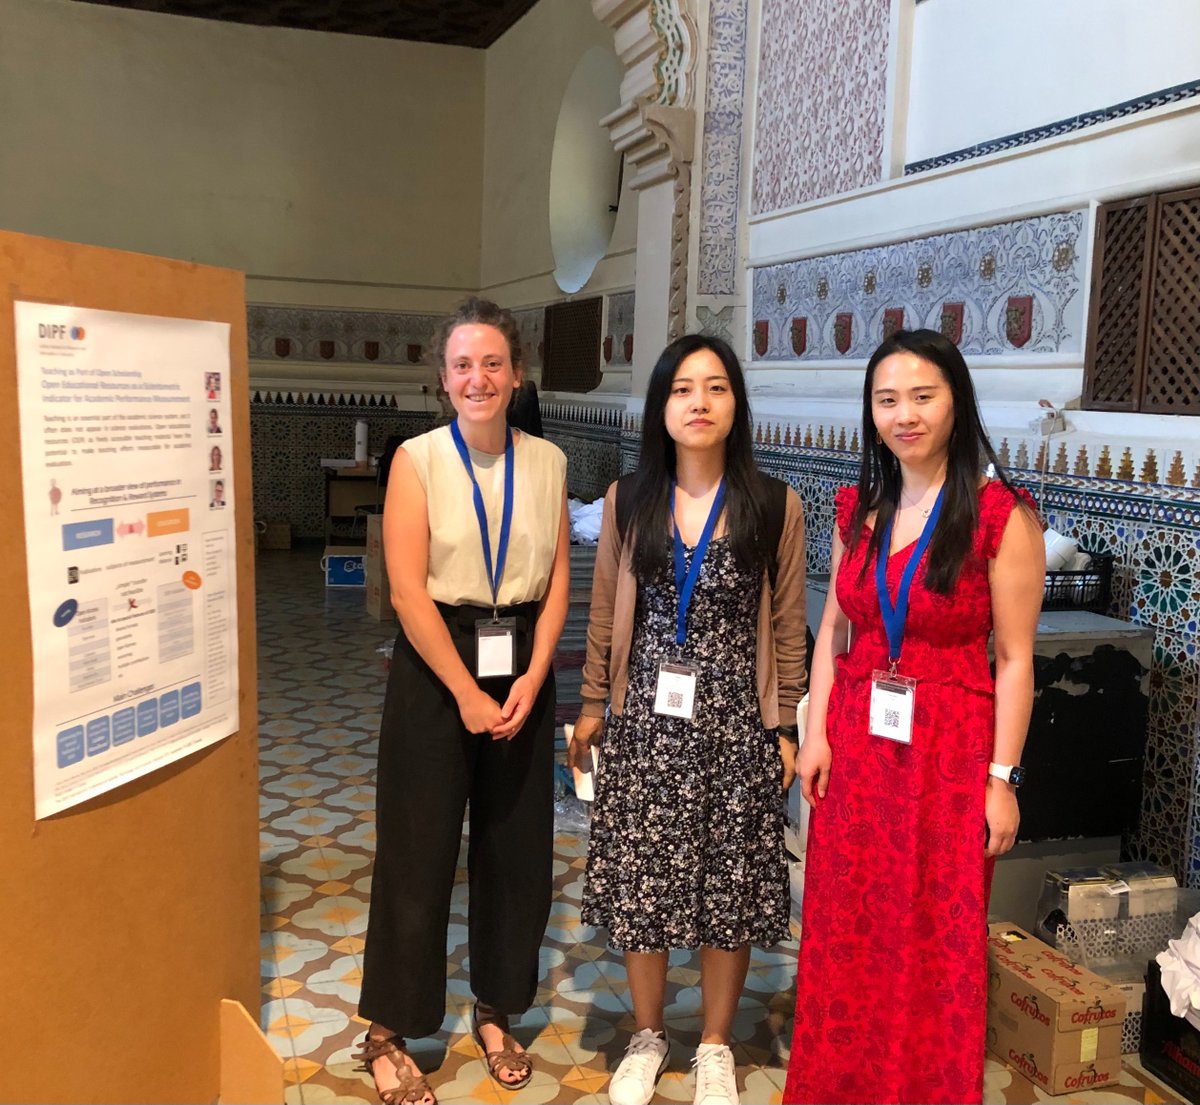 Impression of today's poster sessions at @sti2022grx. @cwtsleiden @QianqianXie727